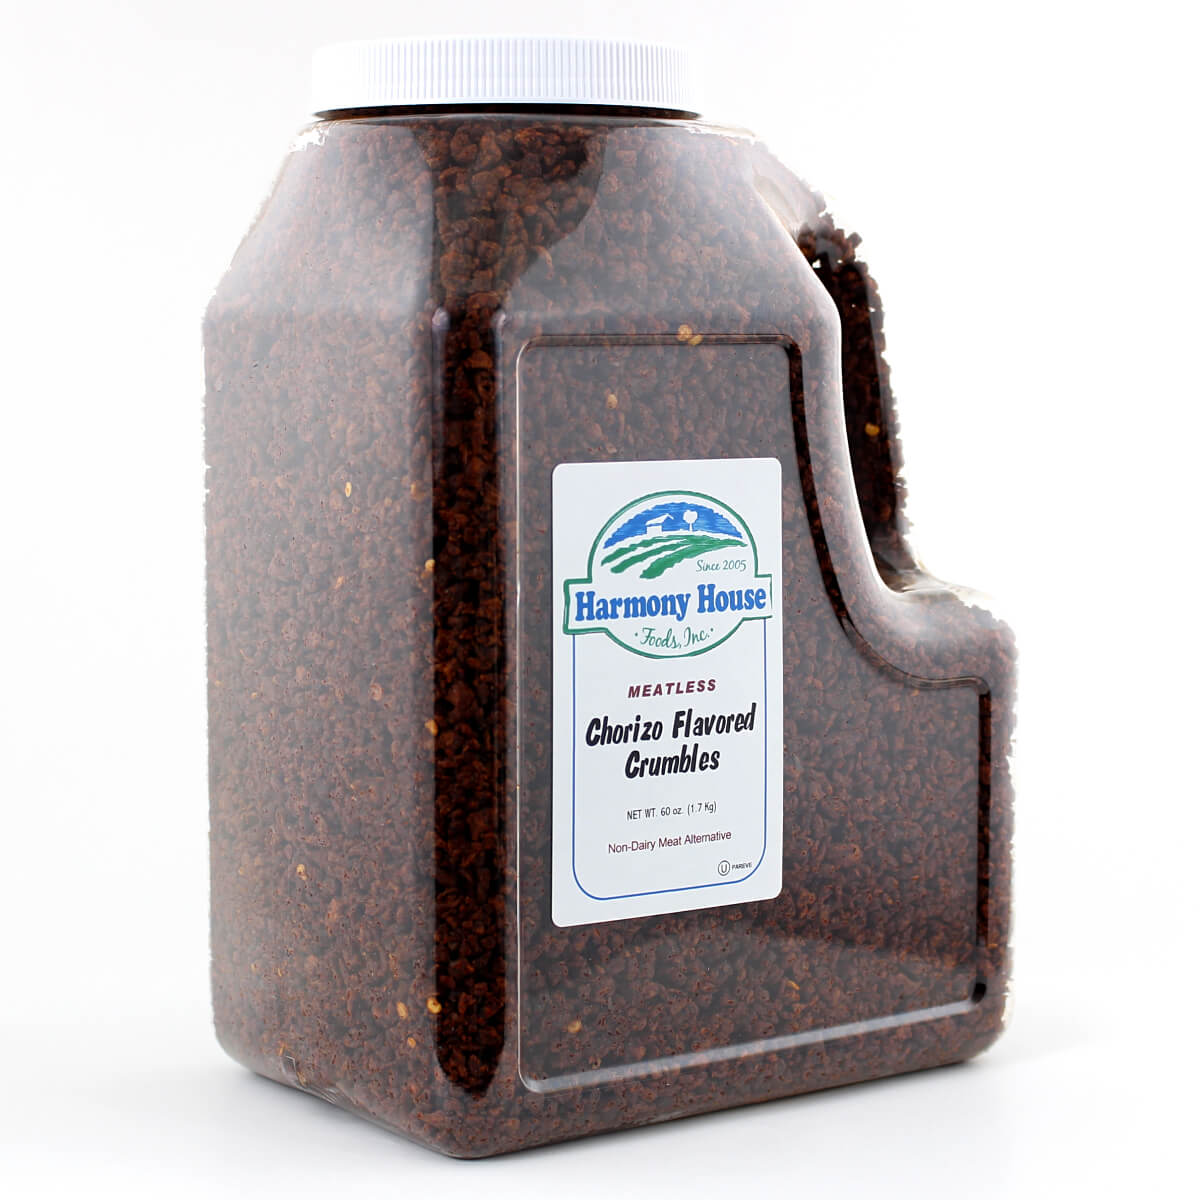 A jug of coffee granules on a white background with Harmony House Chorizo Flavored Crumbles.